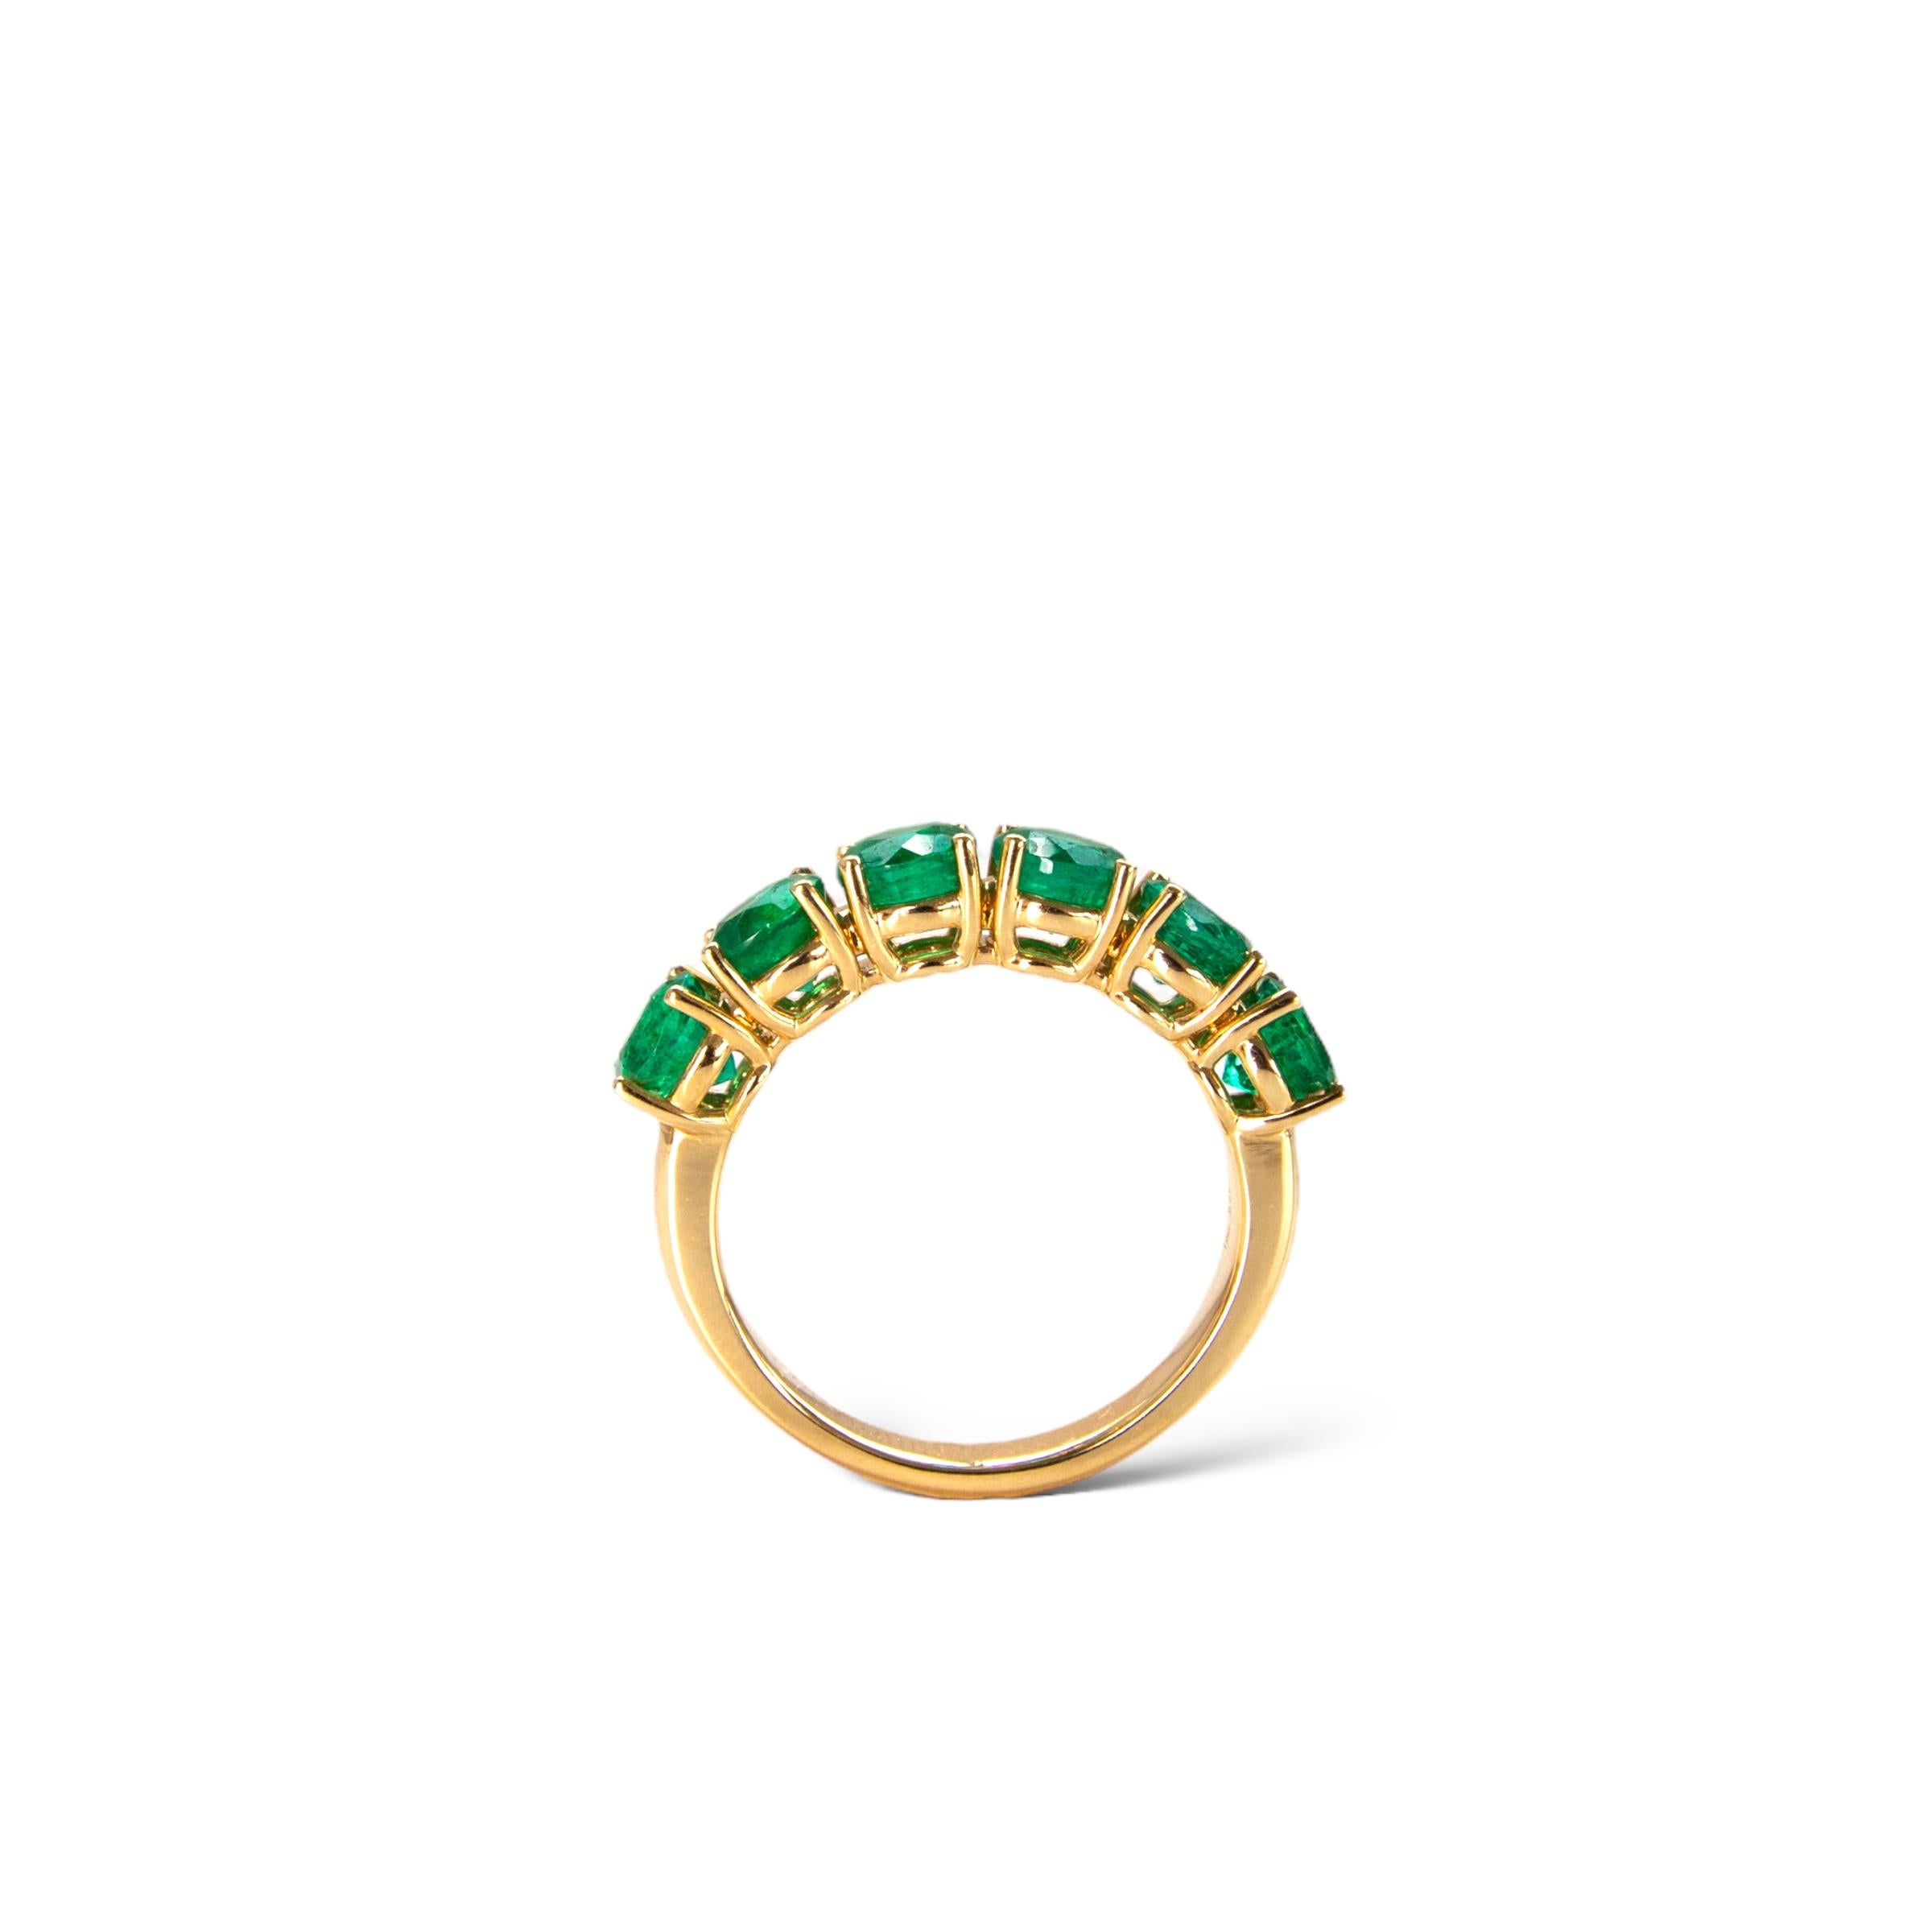 Beautiful Zambian green emerald eternity ring featuring 9 round natural emeralds set in a solid 18k yellow gold ring.

Emeralds are said to bring good fortune and good luck to the wearer, and to attract wealth. In addition, emeralds are believed to